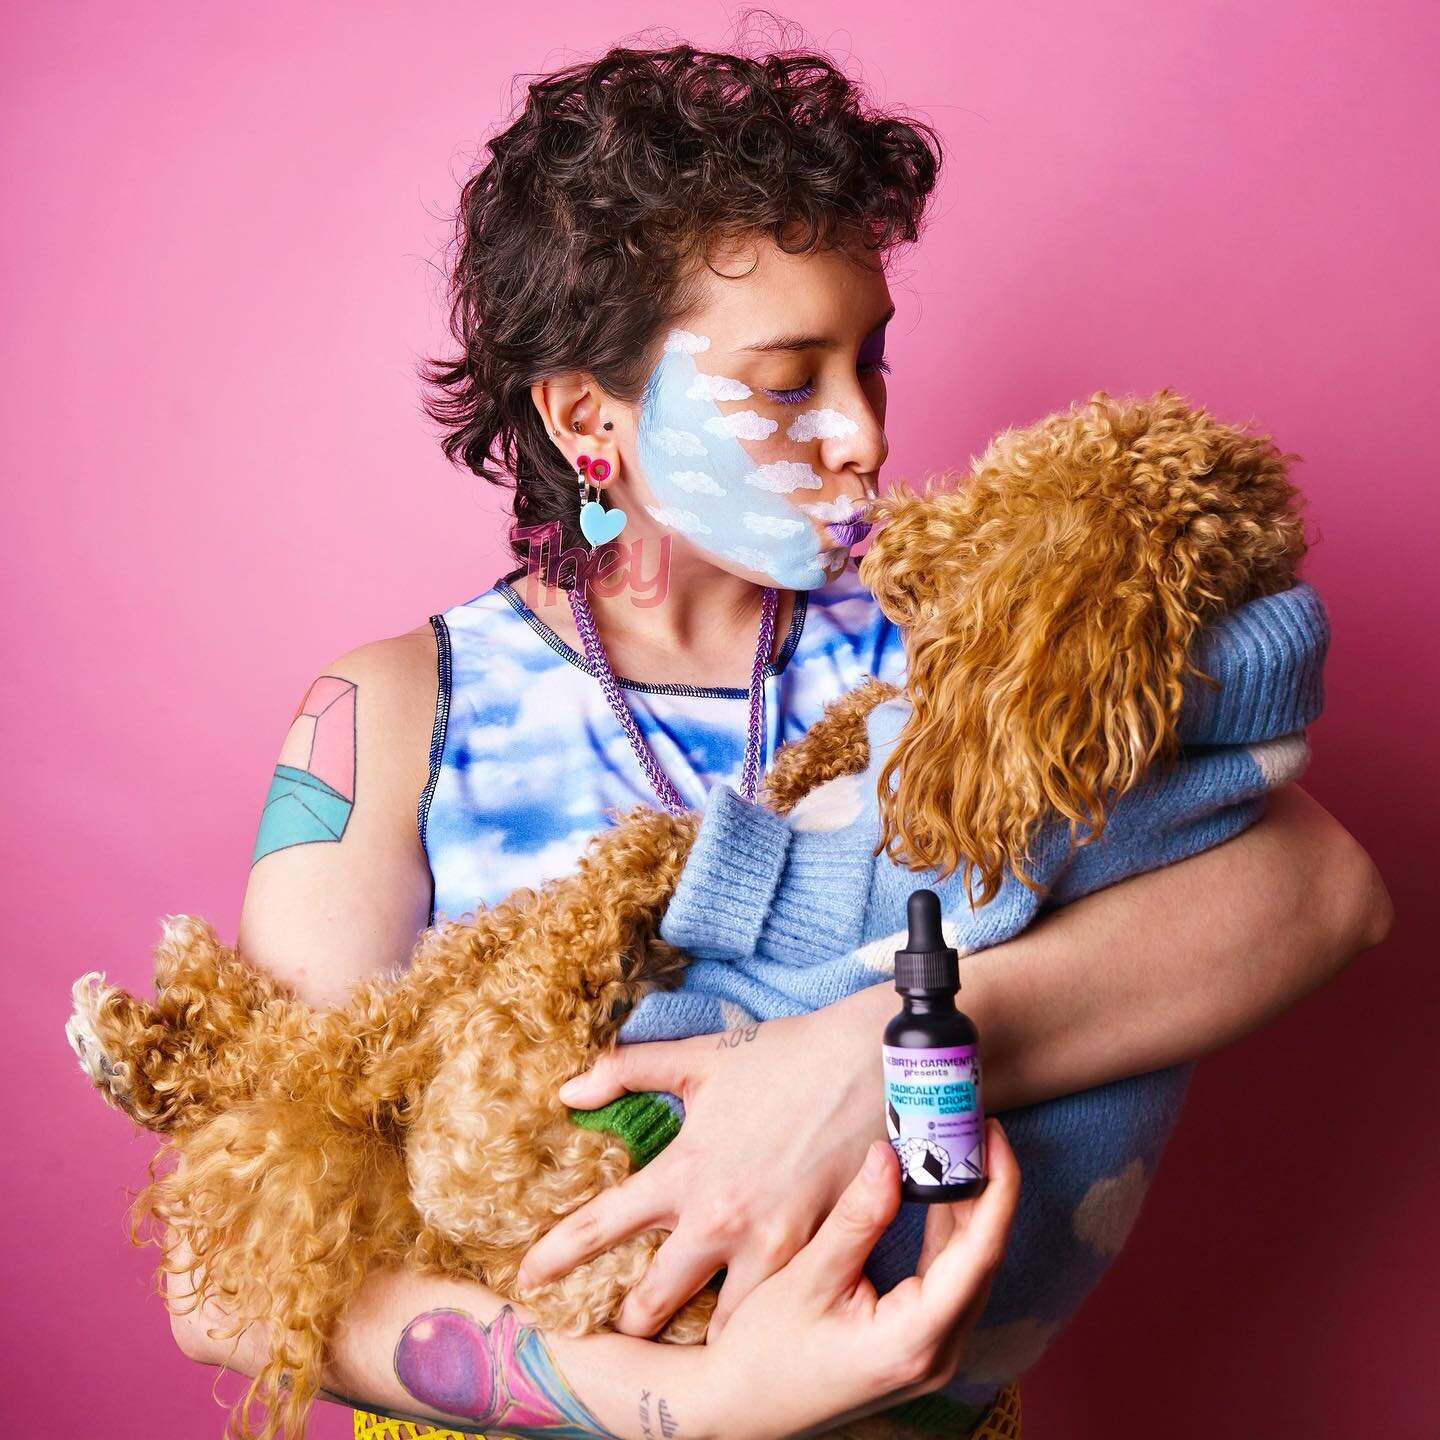 Did you know our unflavored @radicallychill.me CBD can be given to your furry companions? 
CBD is safe for your fur babies (Woof! Meow!) so go get some at radicallychill.me (link also is in bio) 

Pets under 25lbs, start with 0.125 to 0.25 mL per ser